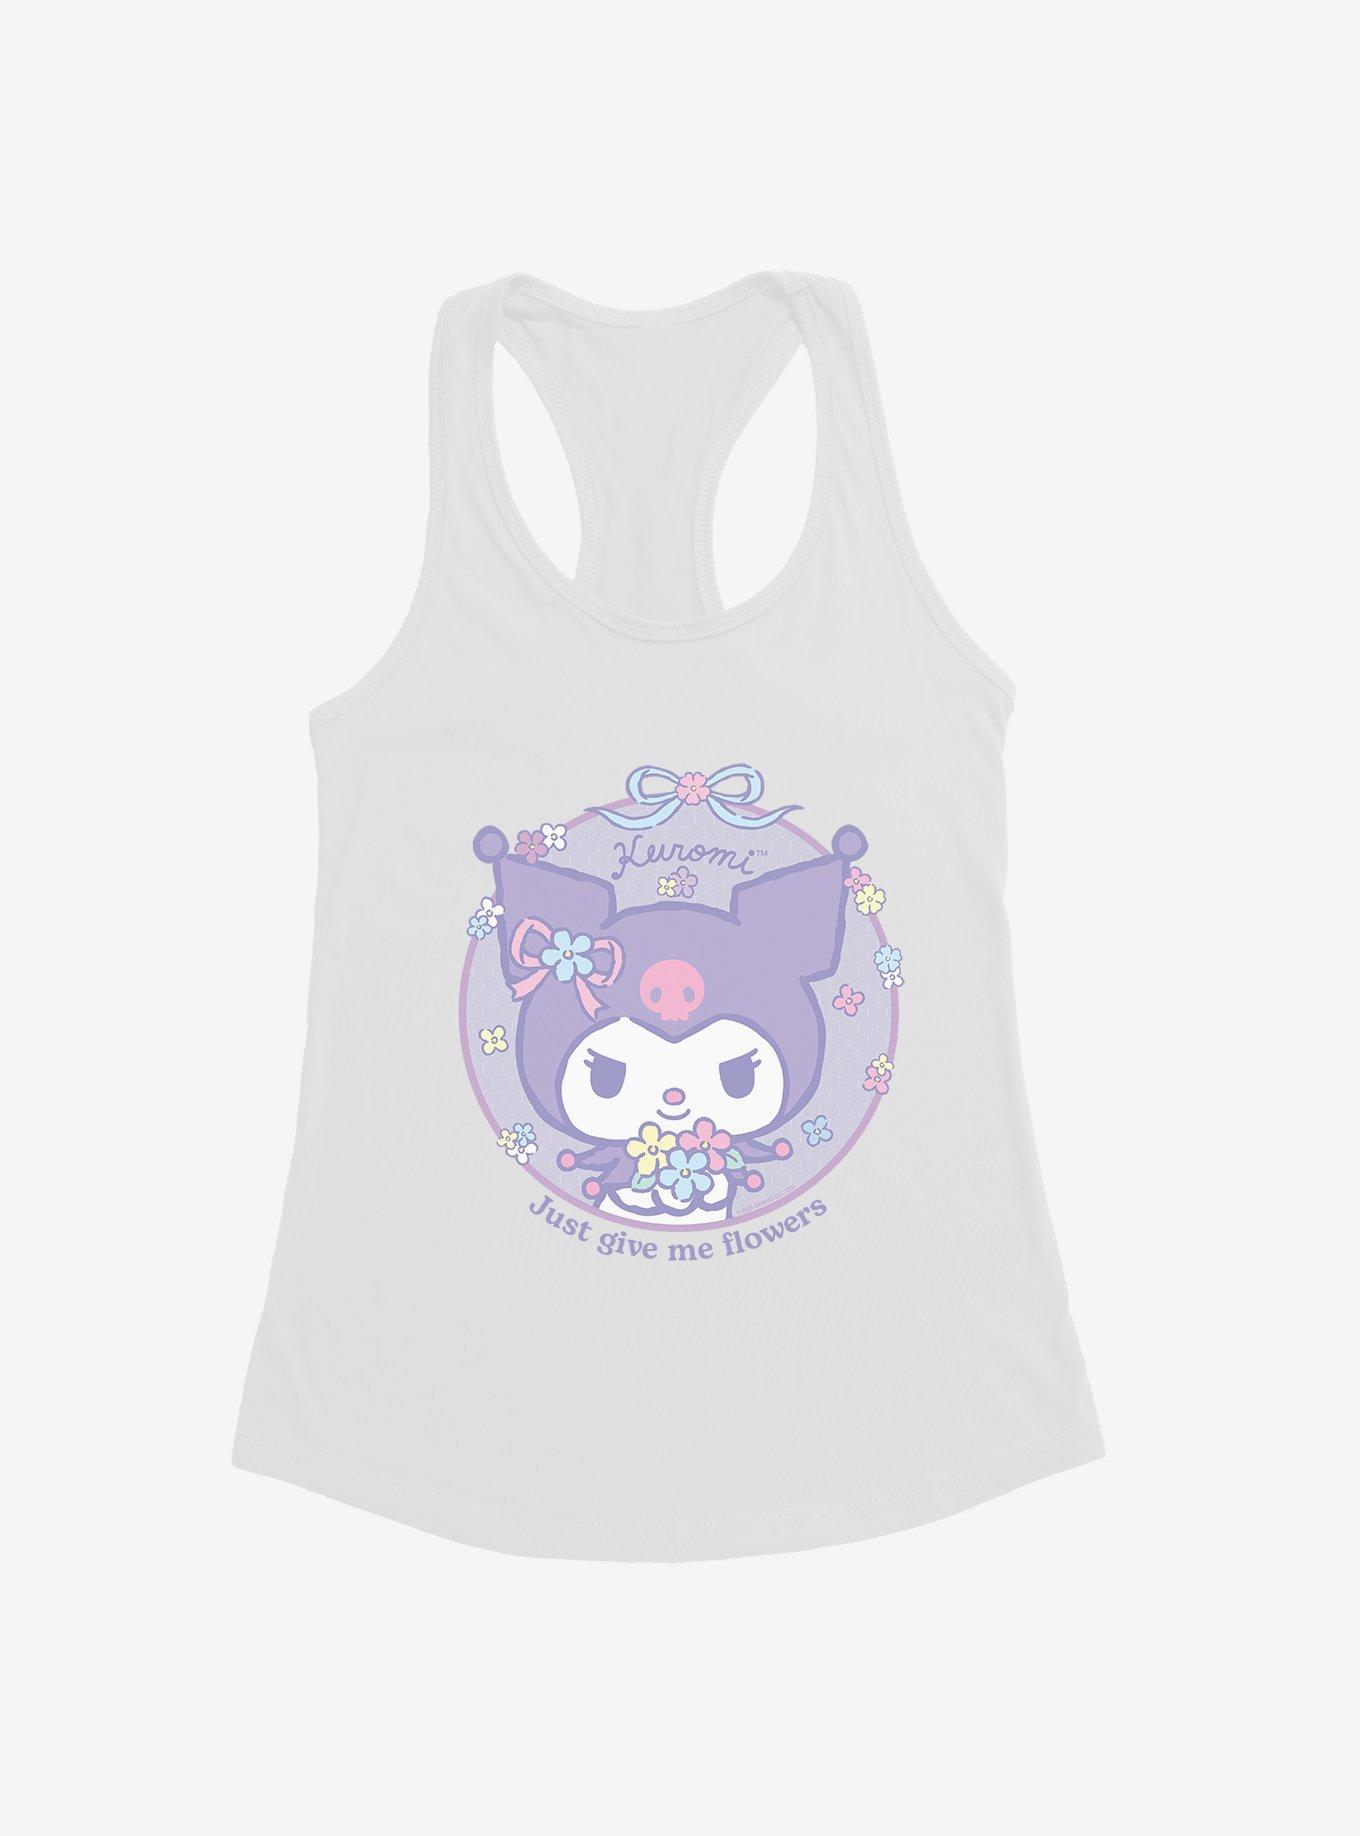 Kuromi Just Give Me Flowers Girls Tank, WHITE, hi-res